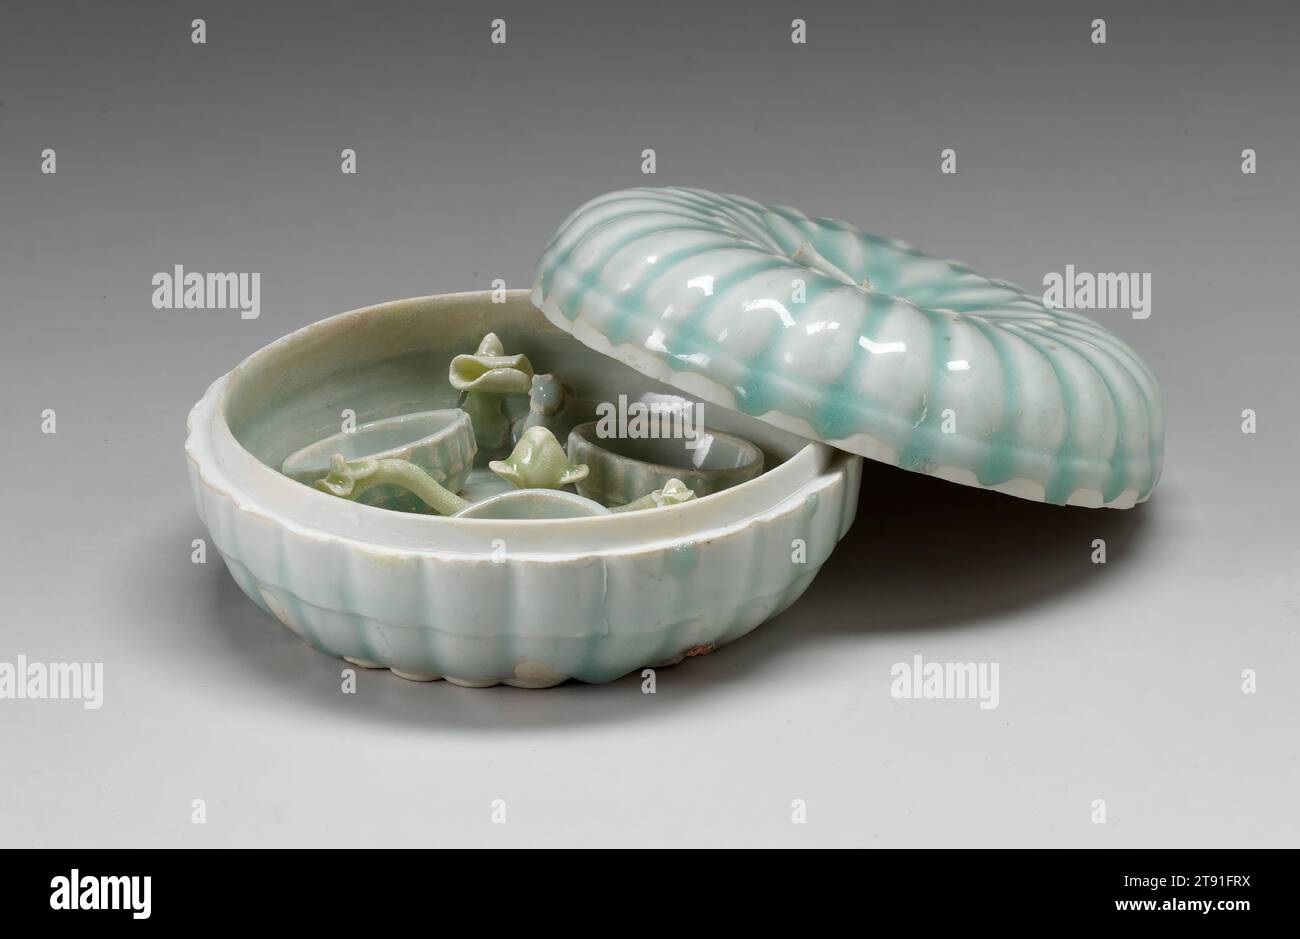 Melon Form Cosmetic Box, 12th-13th century, Tuan Family Workshop, Chinese, 2 1/2 x 5 3/8 x 5 3/8 in. (6.35 x 13.65 x 13.65 cm) (overall), Qingbai ware Porcelain with pale blue glaze, China, 12th-13th century, Shaped in the form of a flattened melon, this lidded box is set on the interior with a large central flower bud from which issue three branches each with furled leaves and buds interspersed with three small rounded containers presumably for cosmetics. Boxes such as this, as well as seal-ink and multifunctional lidded boxes, were produced in great quantity at Yingqing kilns Stock Photo